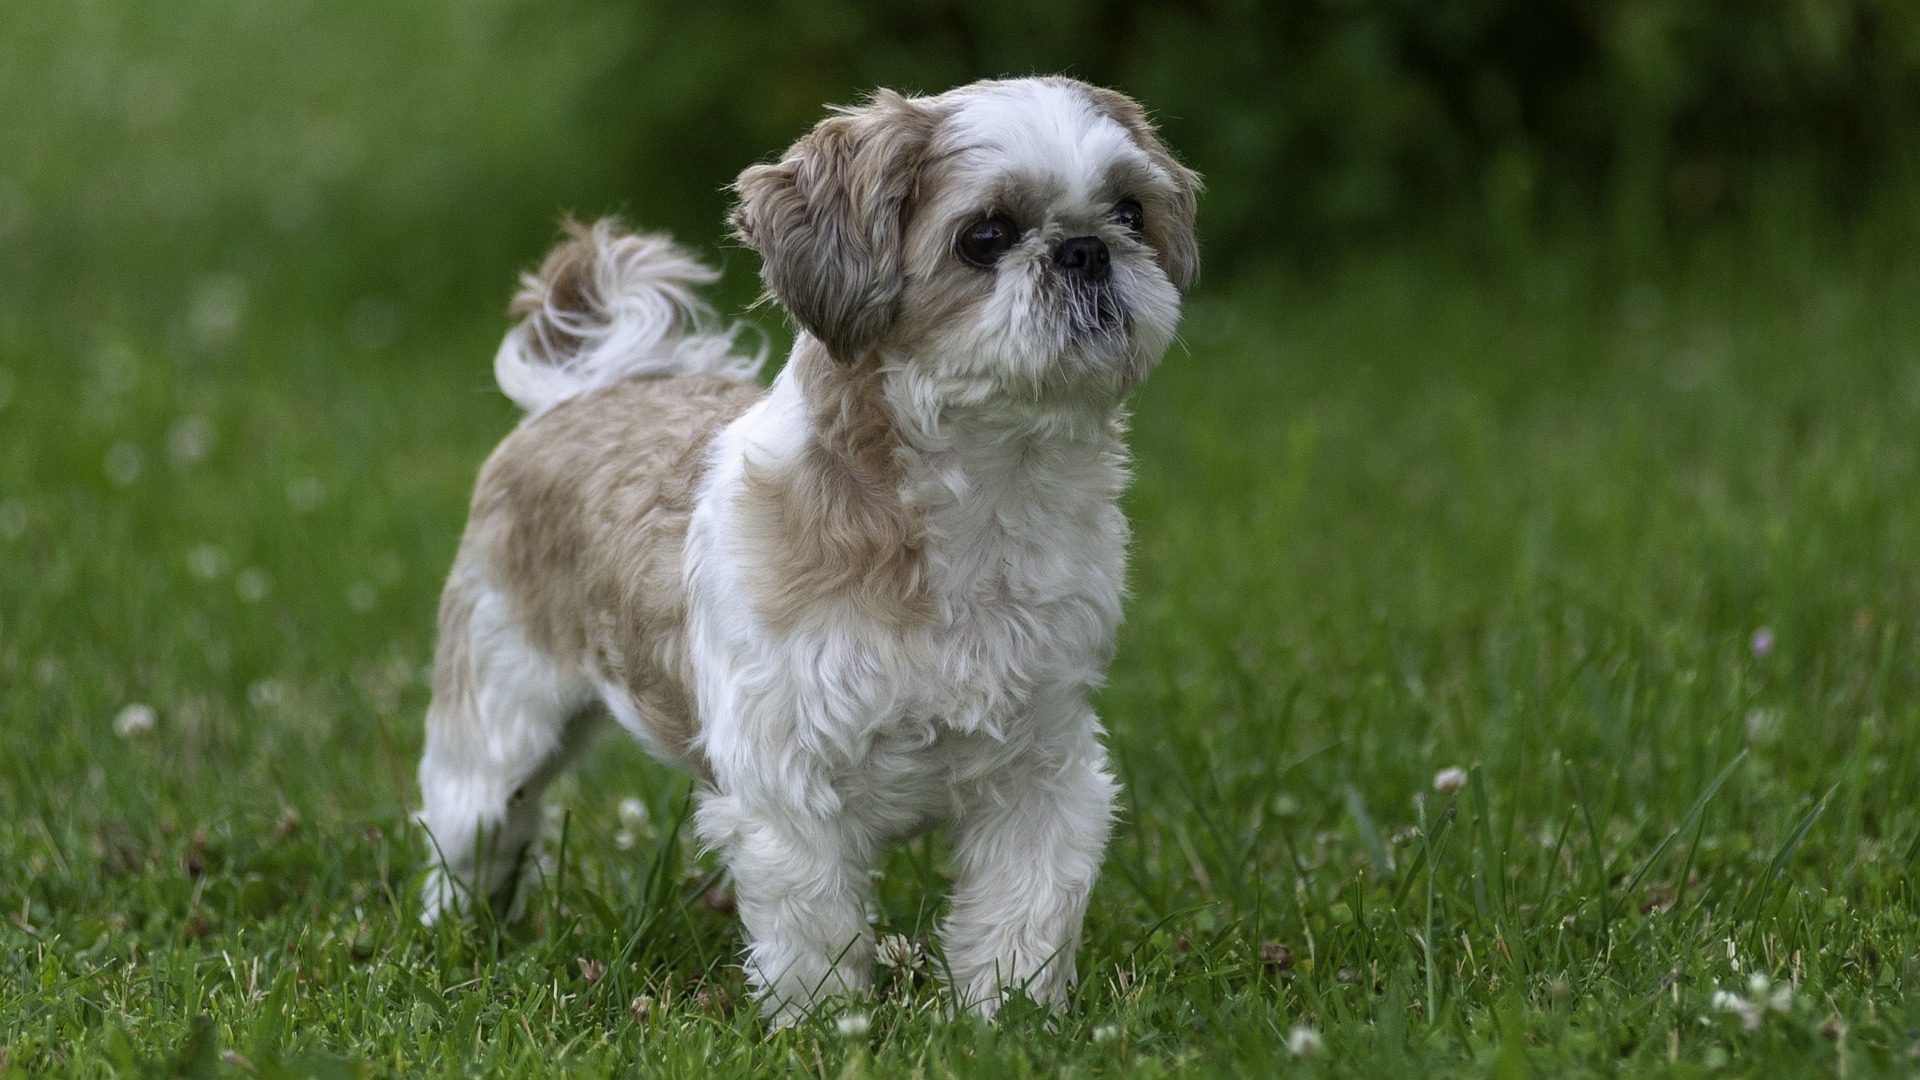 Neutering a Shih Tzu can change their behavior in a number of ways. The most common change is that they will become less aggressive and more easygoing.